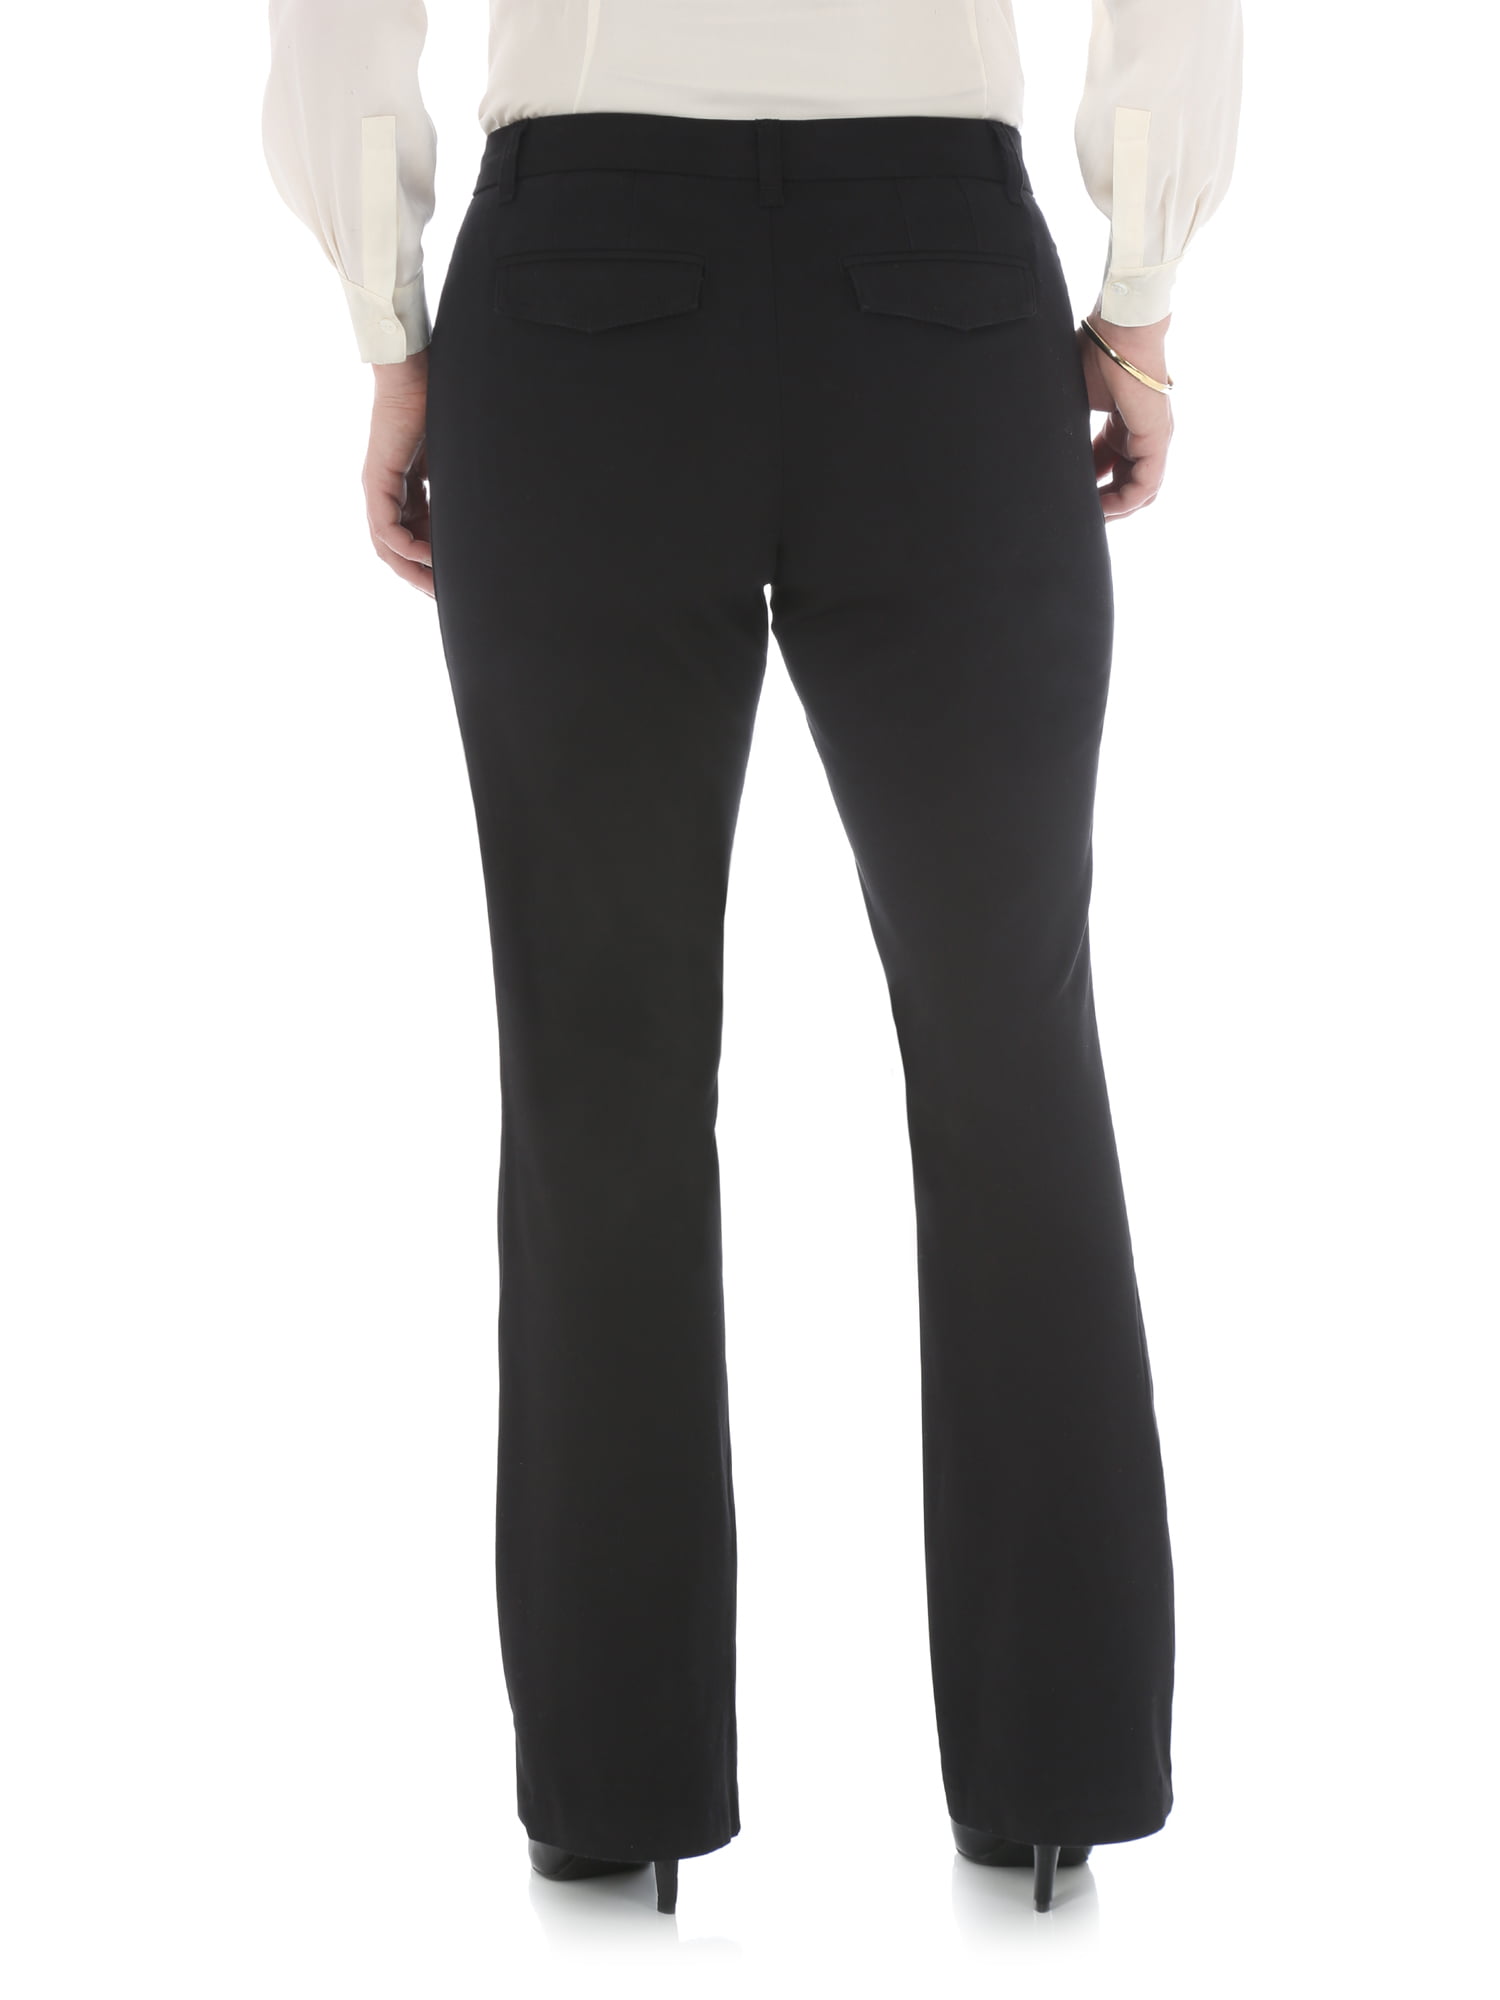 lee riders women's heavenly touch bootcut pant